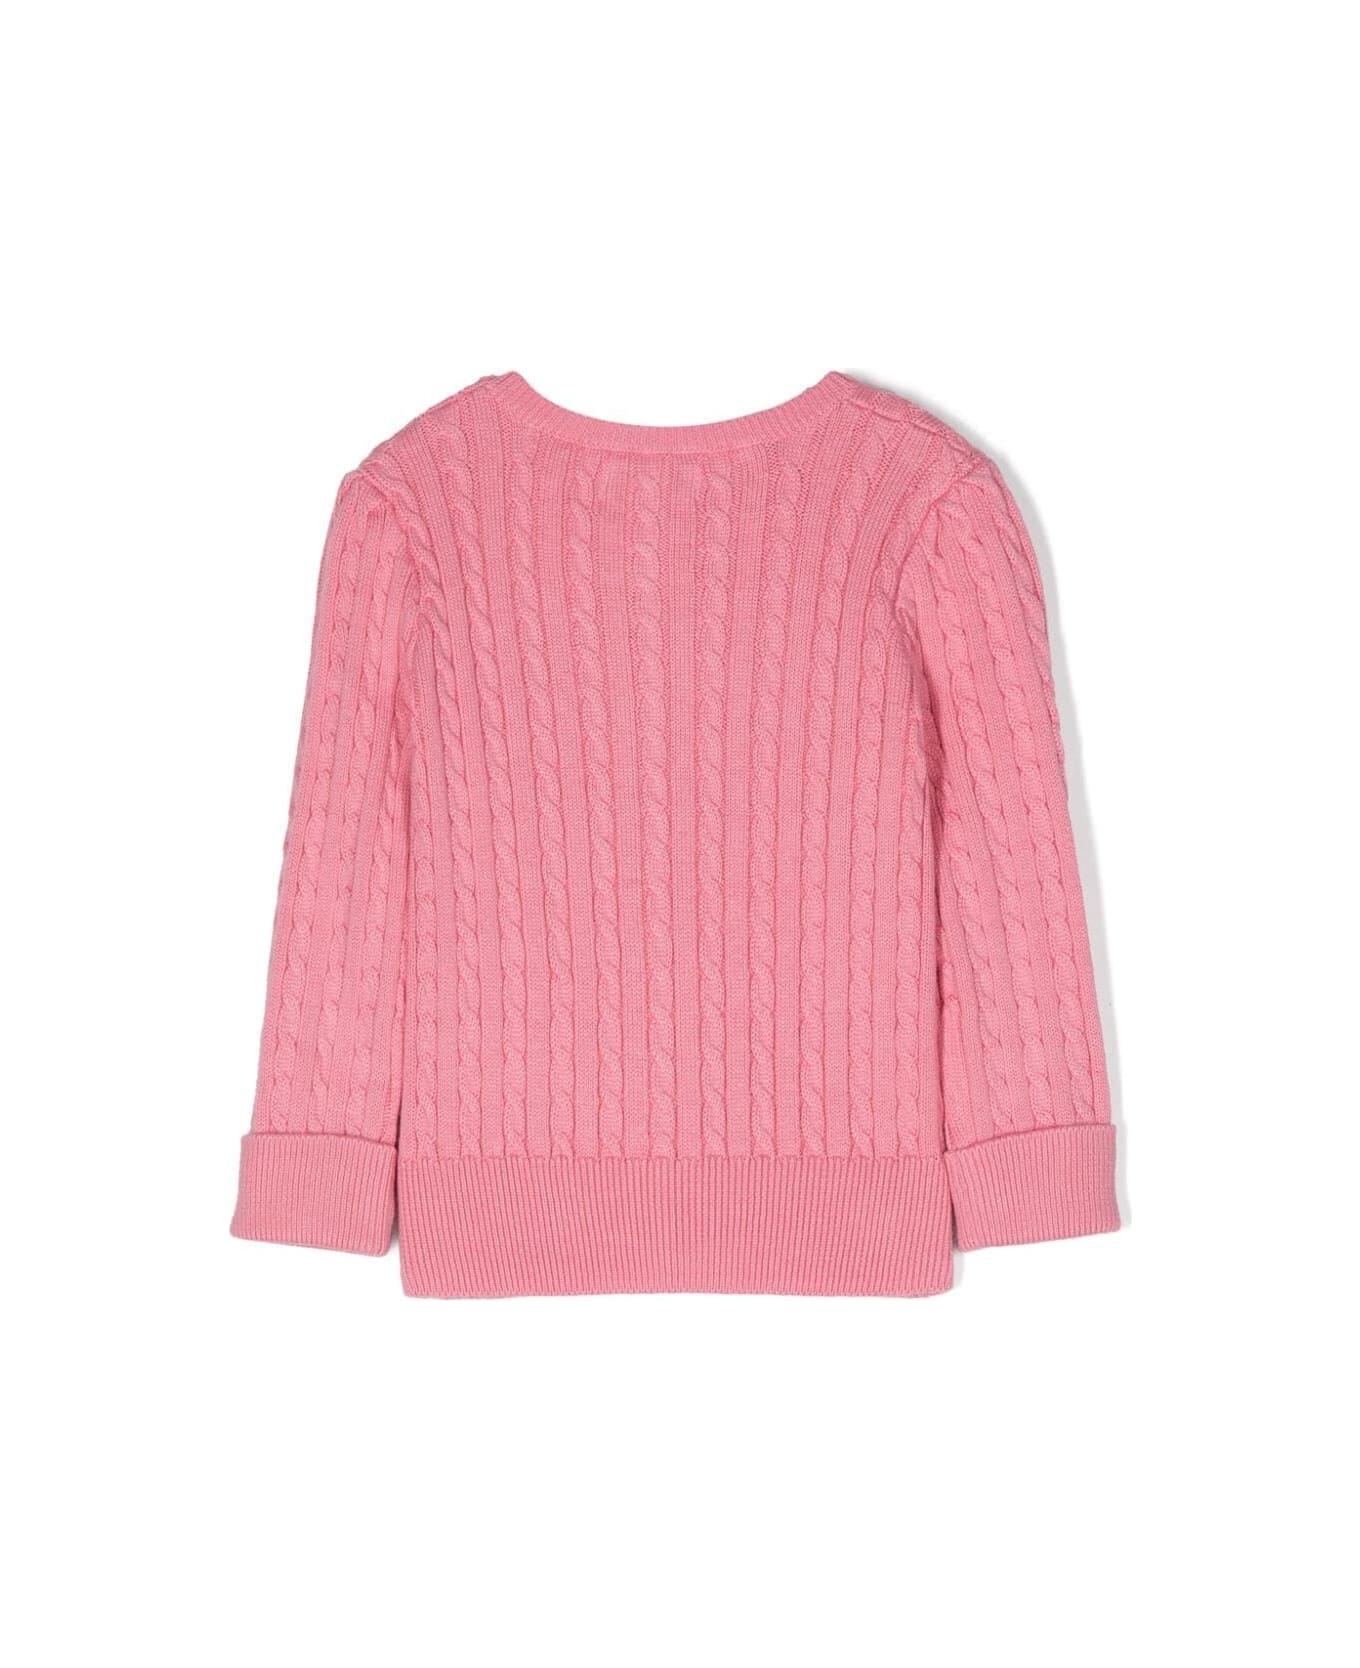 Polo Ralph Lauren Mini Cable Tops Sweater - Florida Pink With Oasis Yellow